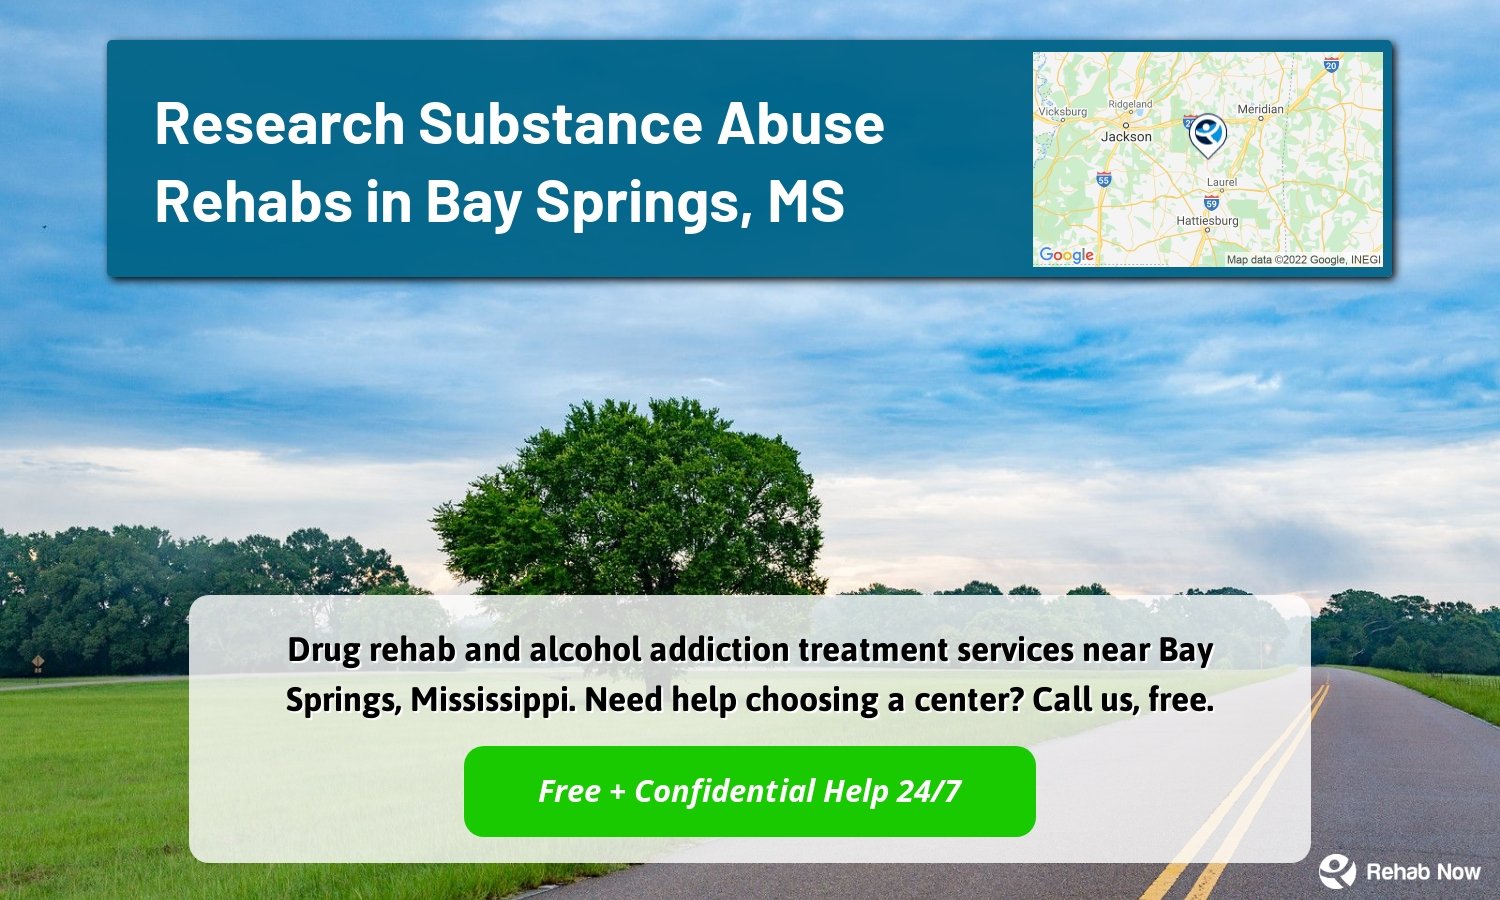 Drug rehab and alcohol addiction treatment services near Bay Springs, Mississippi. Need help choosing a center? Call us, free.